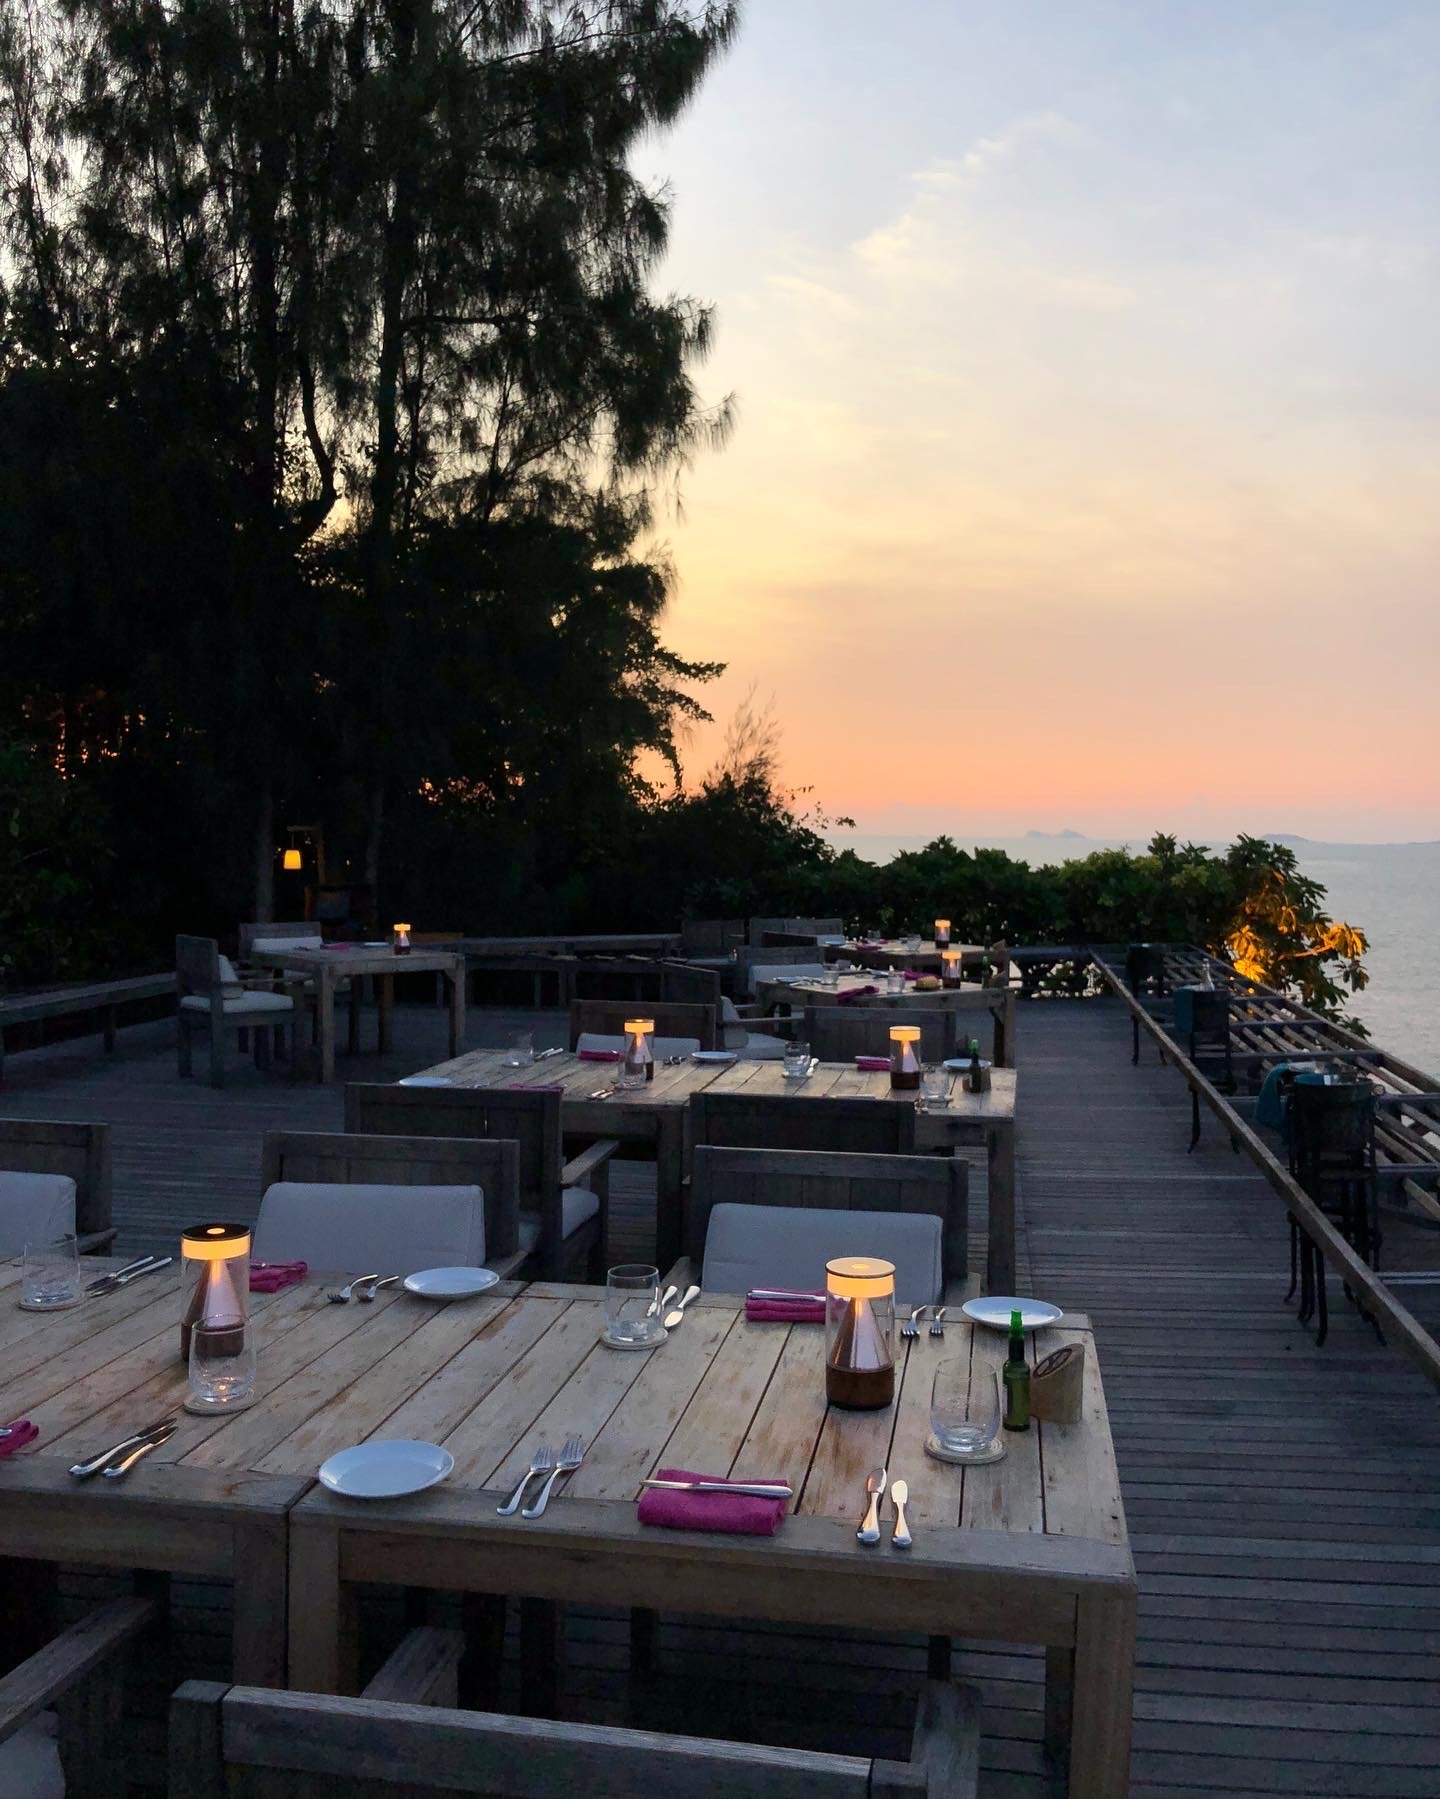  Dining on the Rocks is an experience you’ll never forget.  